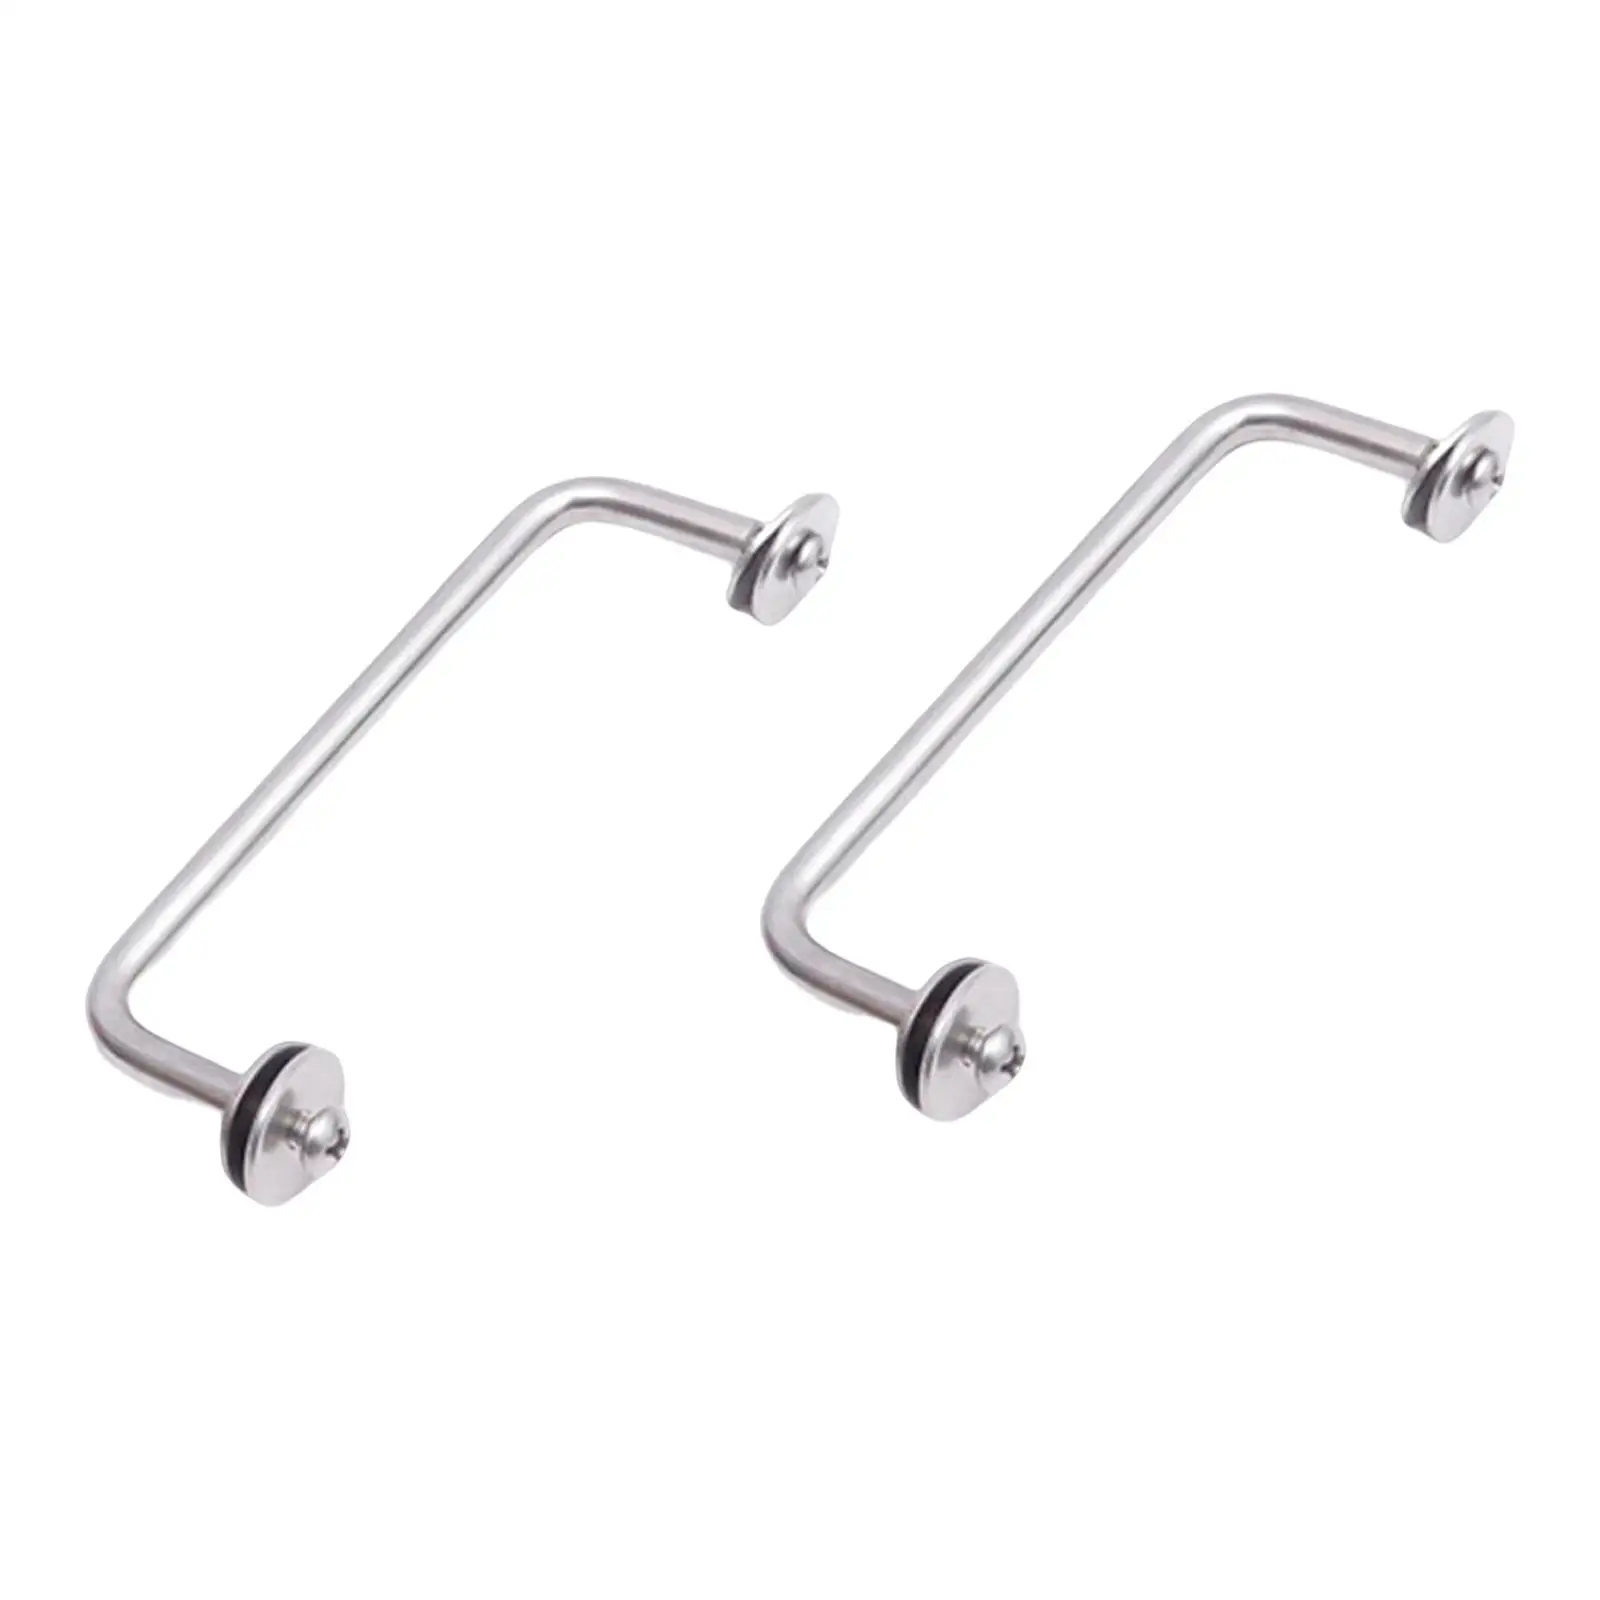 2Pieces Scuba Diving Buttplate Handle Stainless Steel Hardware Dive Rail for Fishing Kayaking Snorkeling Accessories